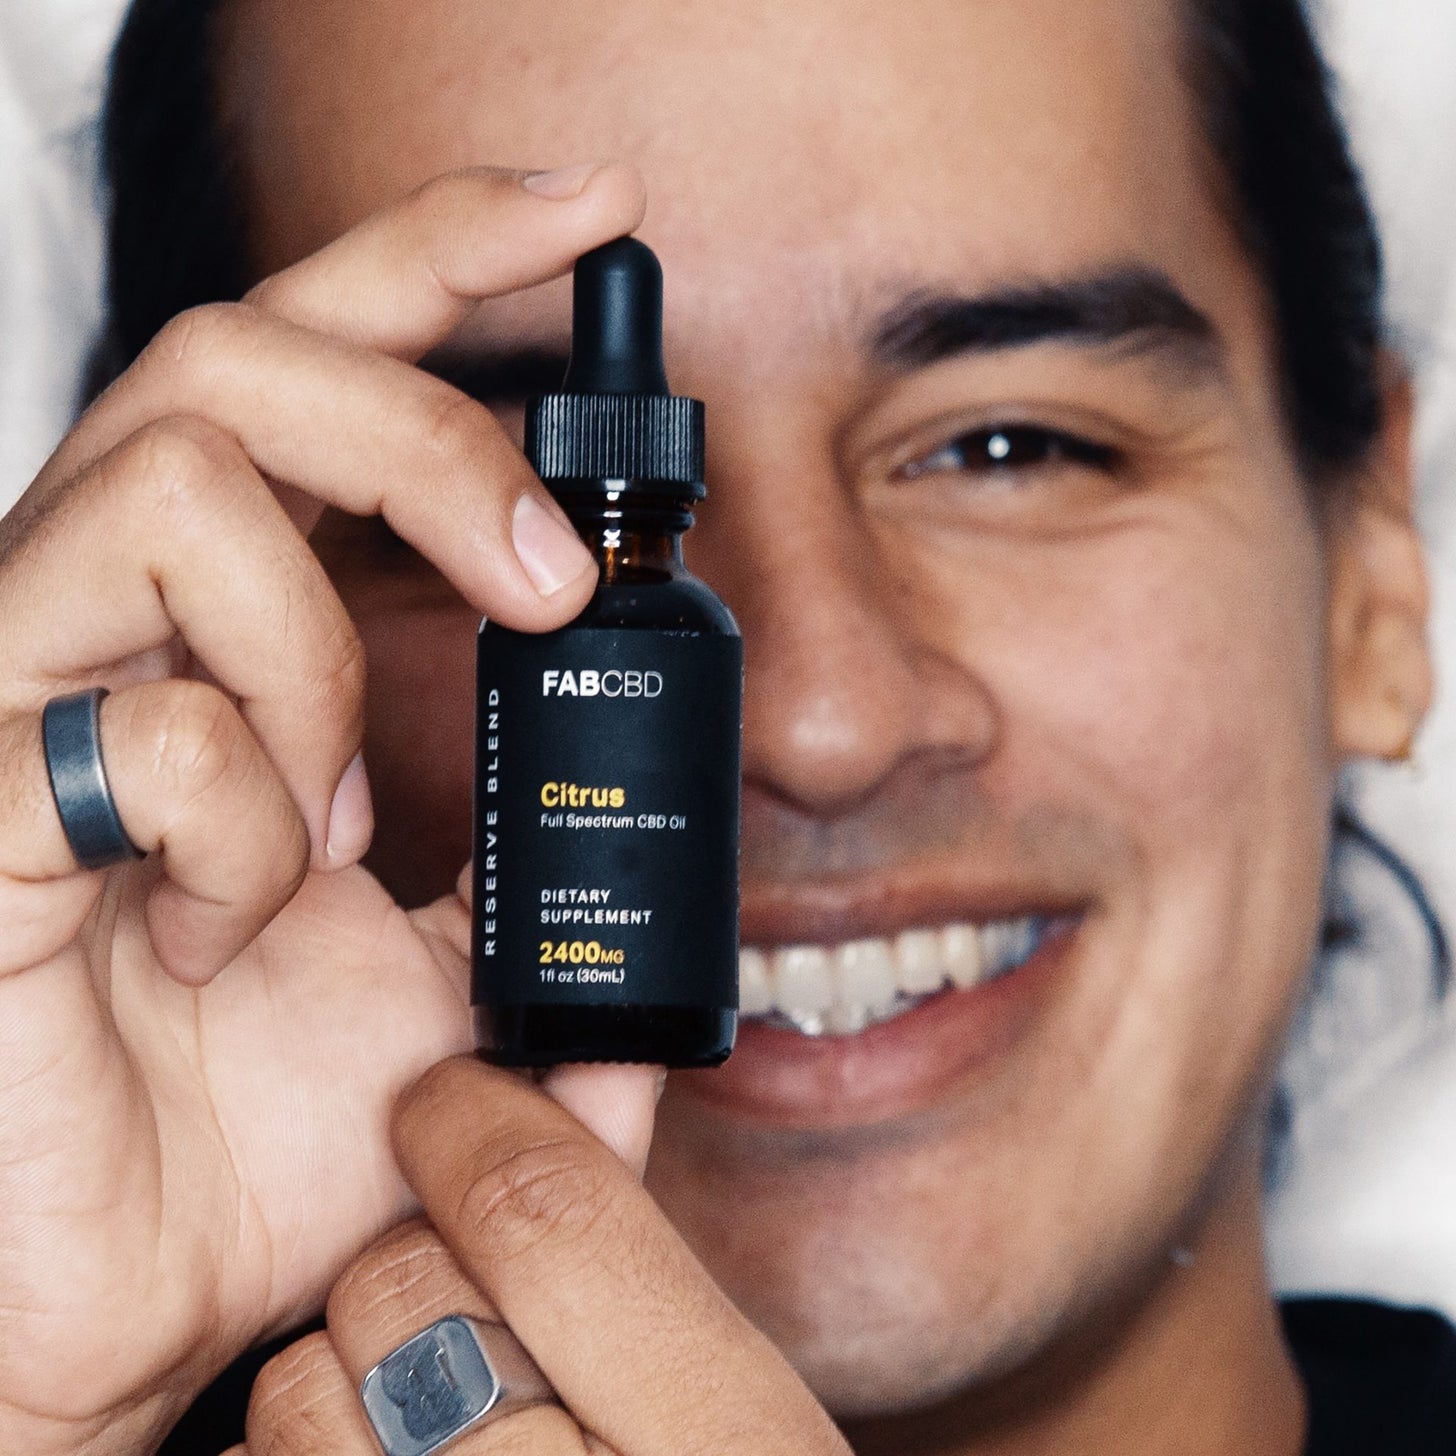 Fab CBD Oil Tincture held in front of a smiling man's face